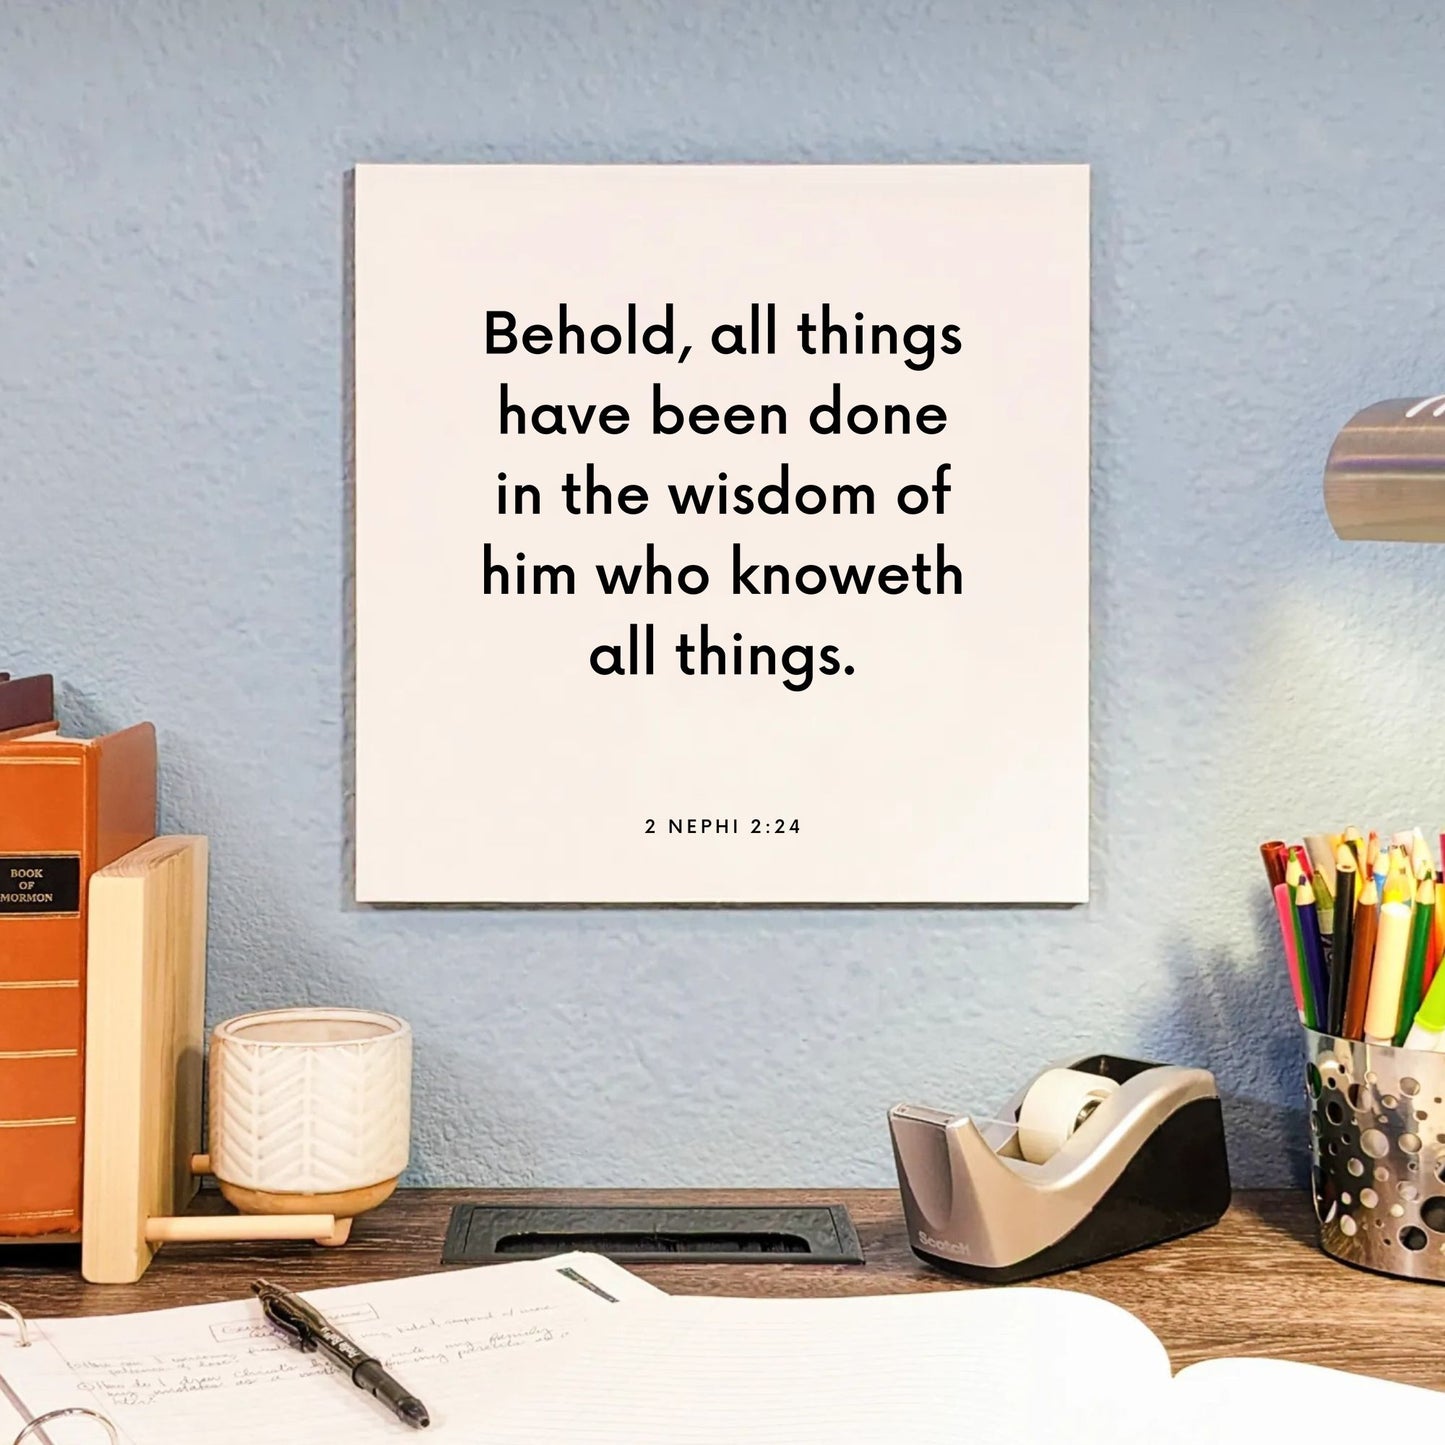 Desk mouting of the scripture tile for 2 Nephi 2:24 - "All things have been done in the wisdom of him who knoweth"